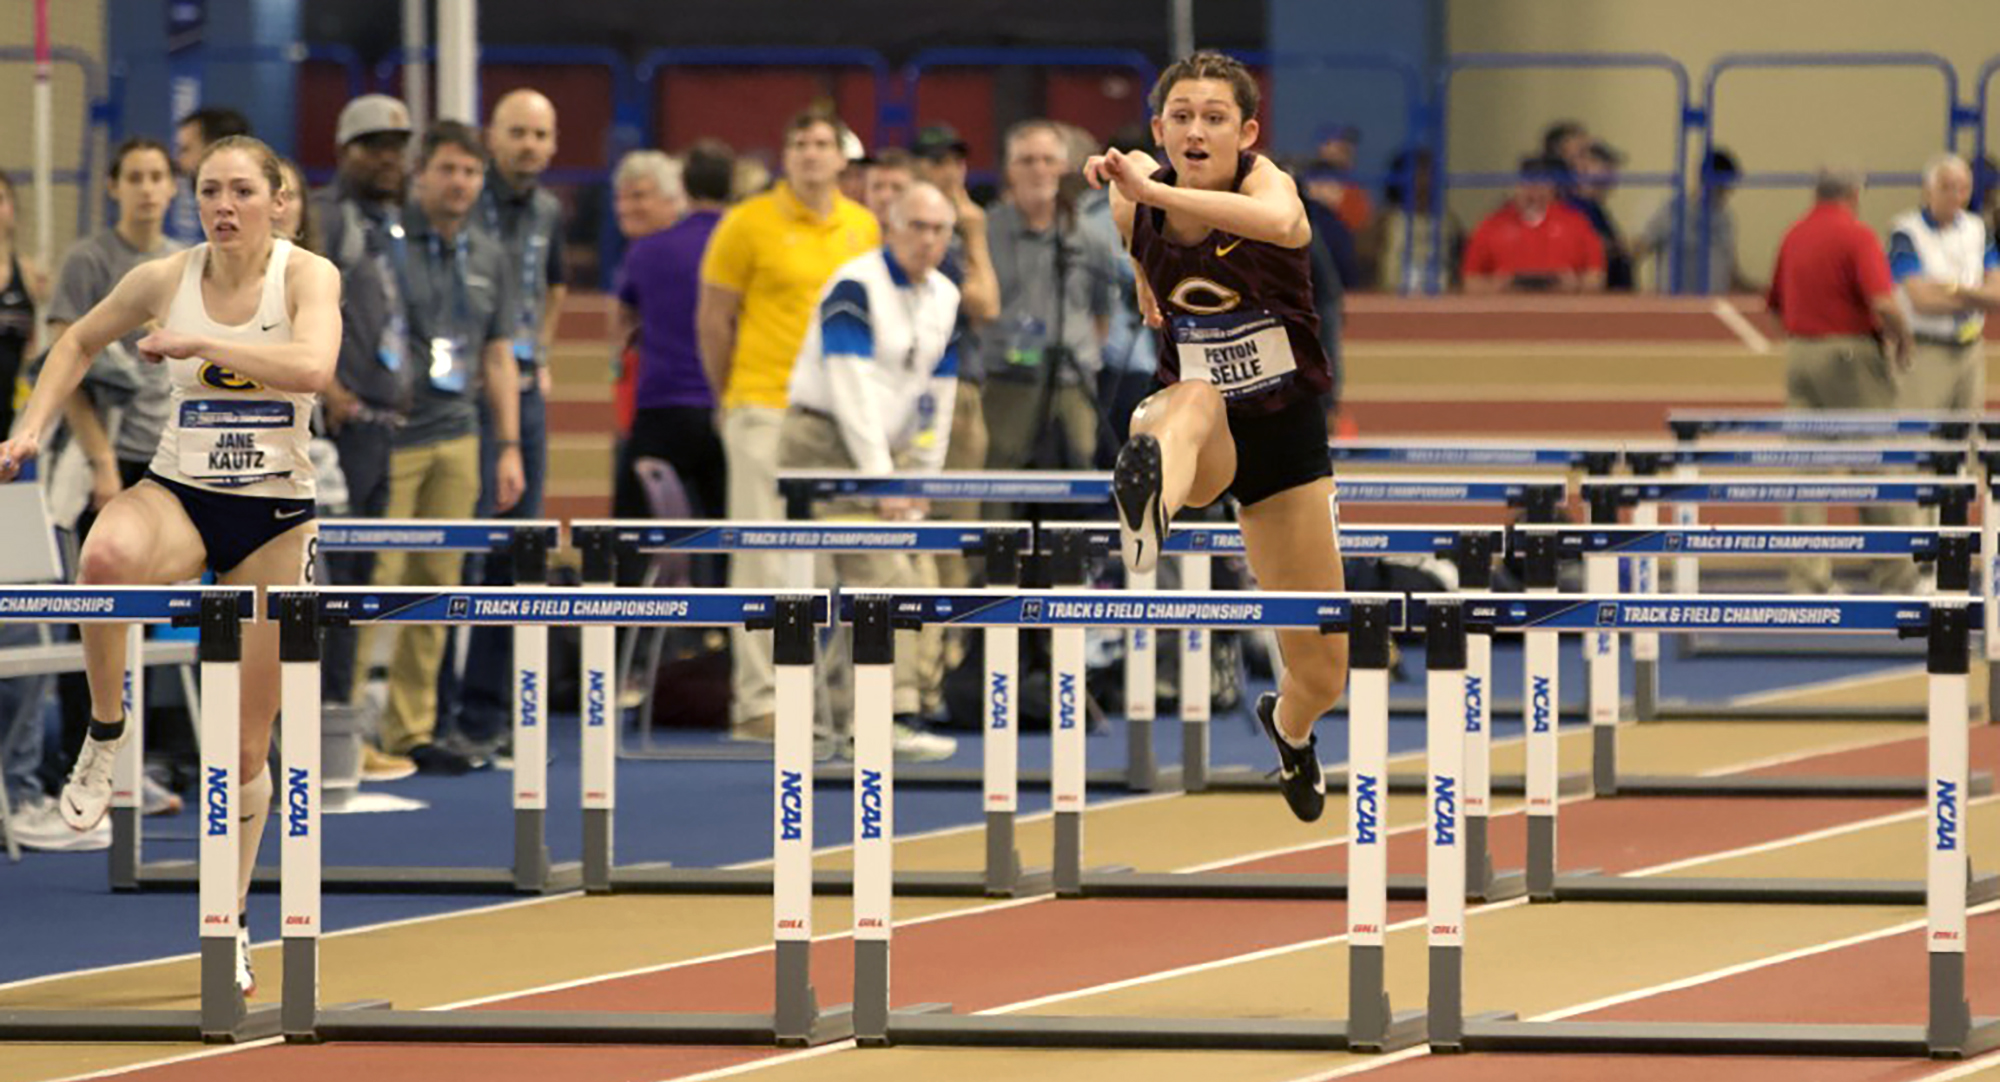 Peyton Selle clears the hurdle in the 60-meter hurdles in the pentathlon at the NCAA Indoor Meet. (Photo courtesy of Kelly Anderson Diercks, St. Ben's)